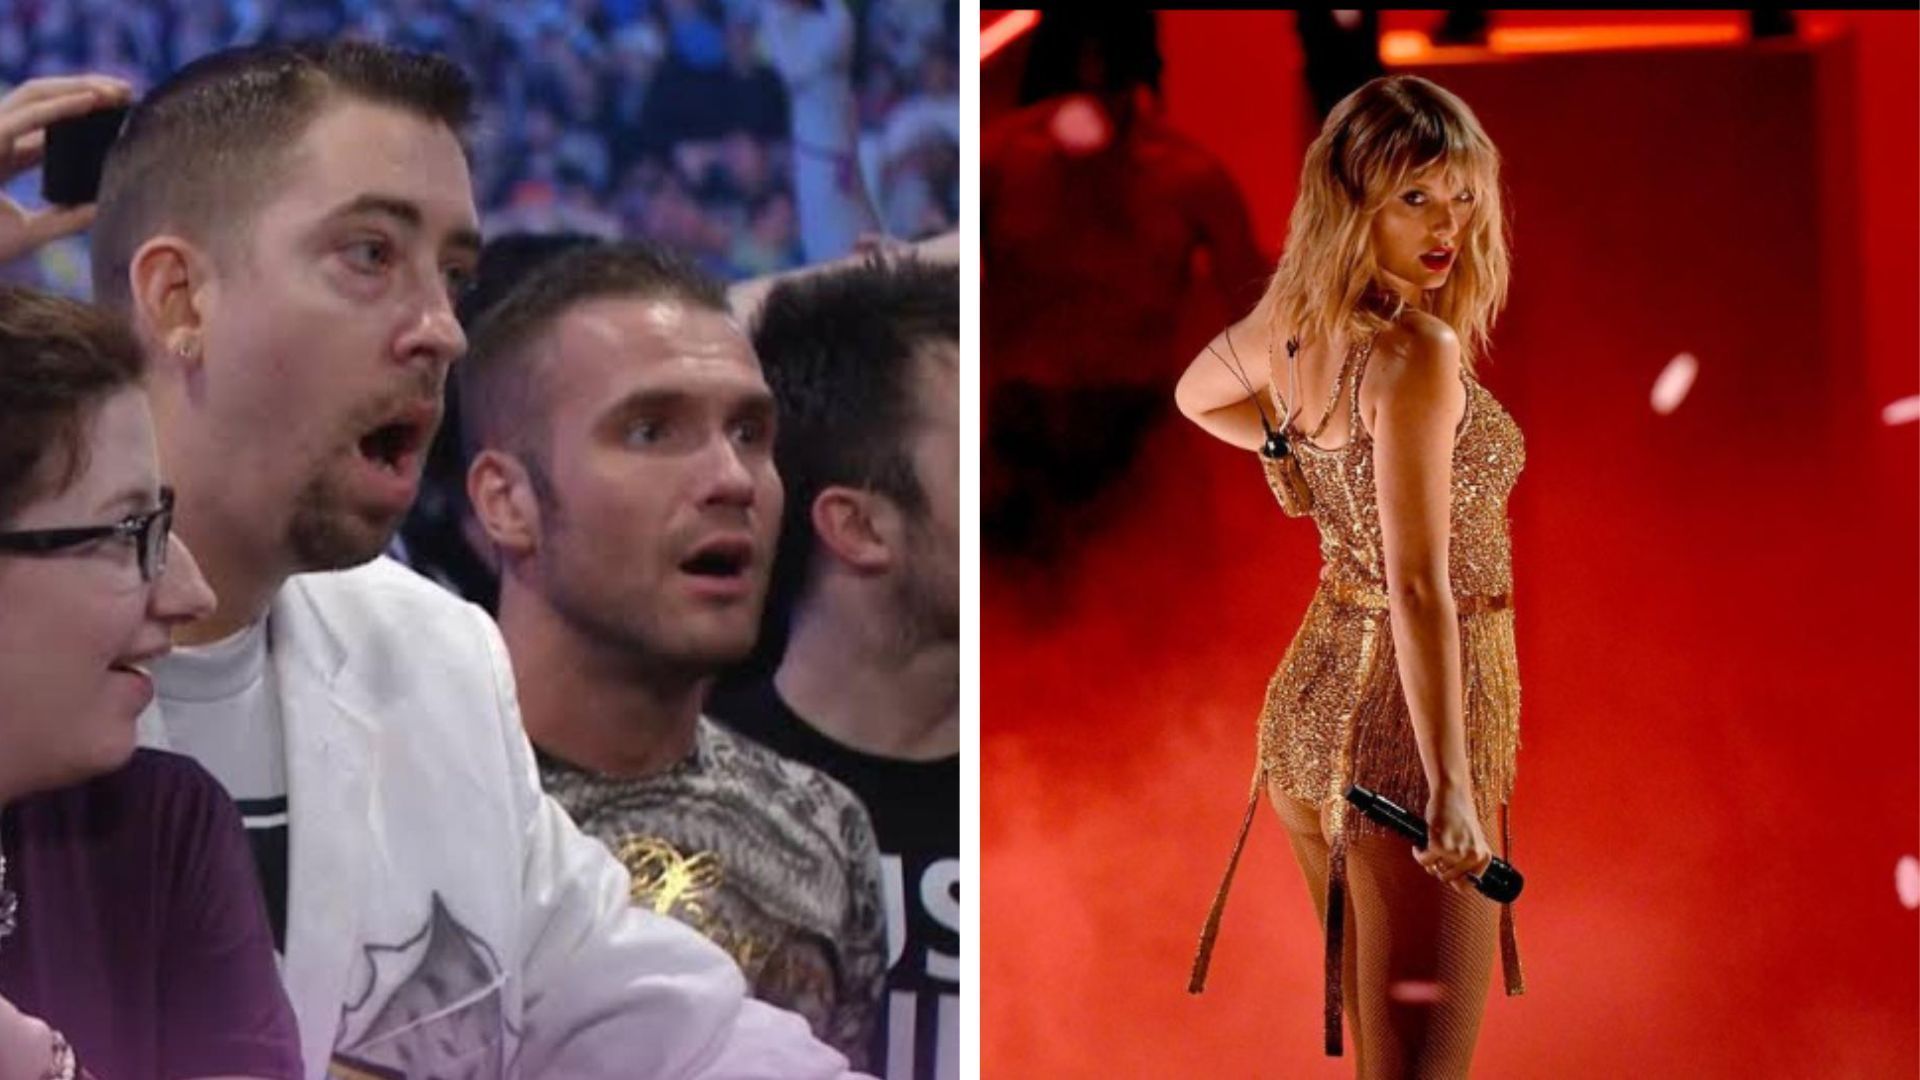 WWE fans stunned on the left, Taylor Swift on the right